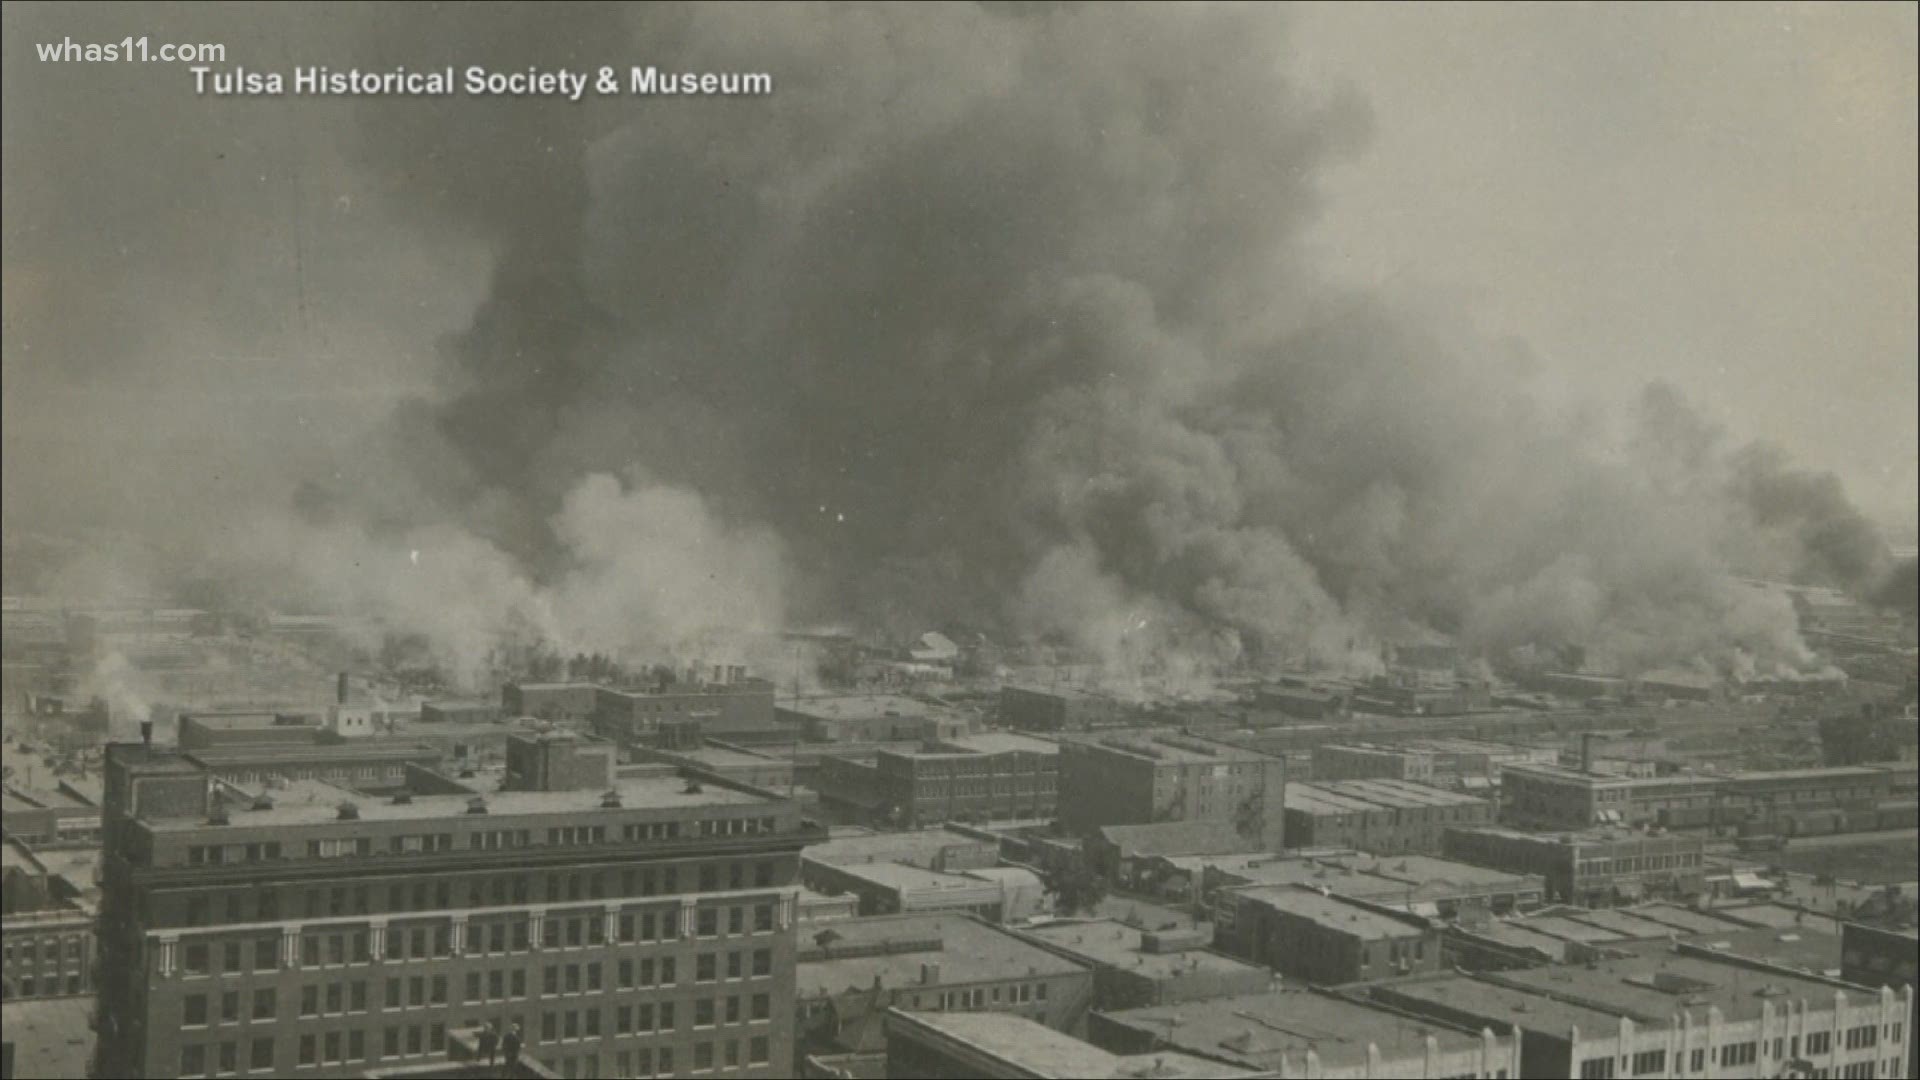 When the smoke cleared in June 1921, the toll from the massacre in Tulsa, Oklahoma, was catastrophic — scores of lives lost, homes and businesses burned.